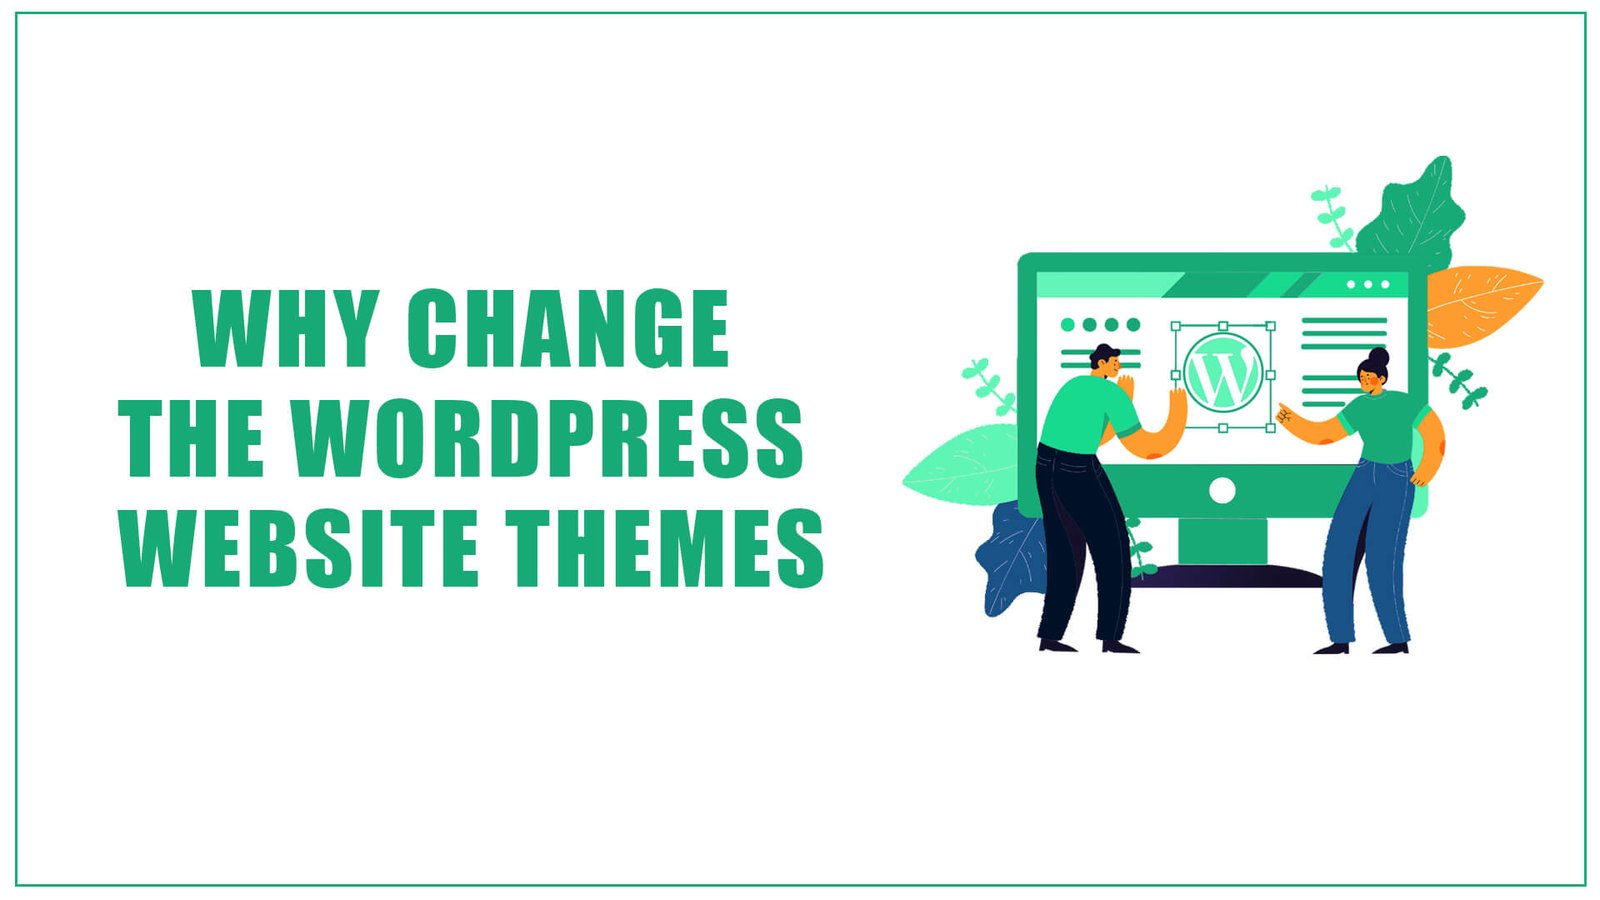 Why Change the WordPress Website Themes? Choose Productive theme